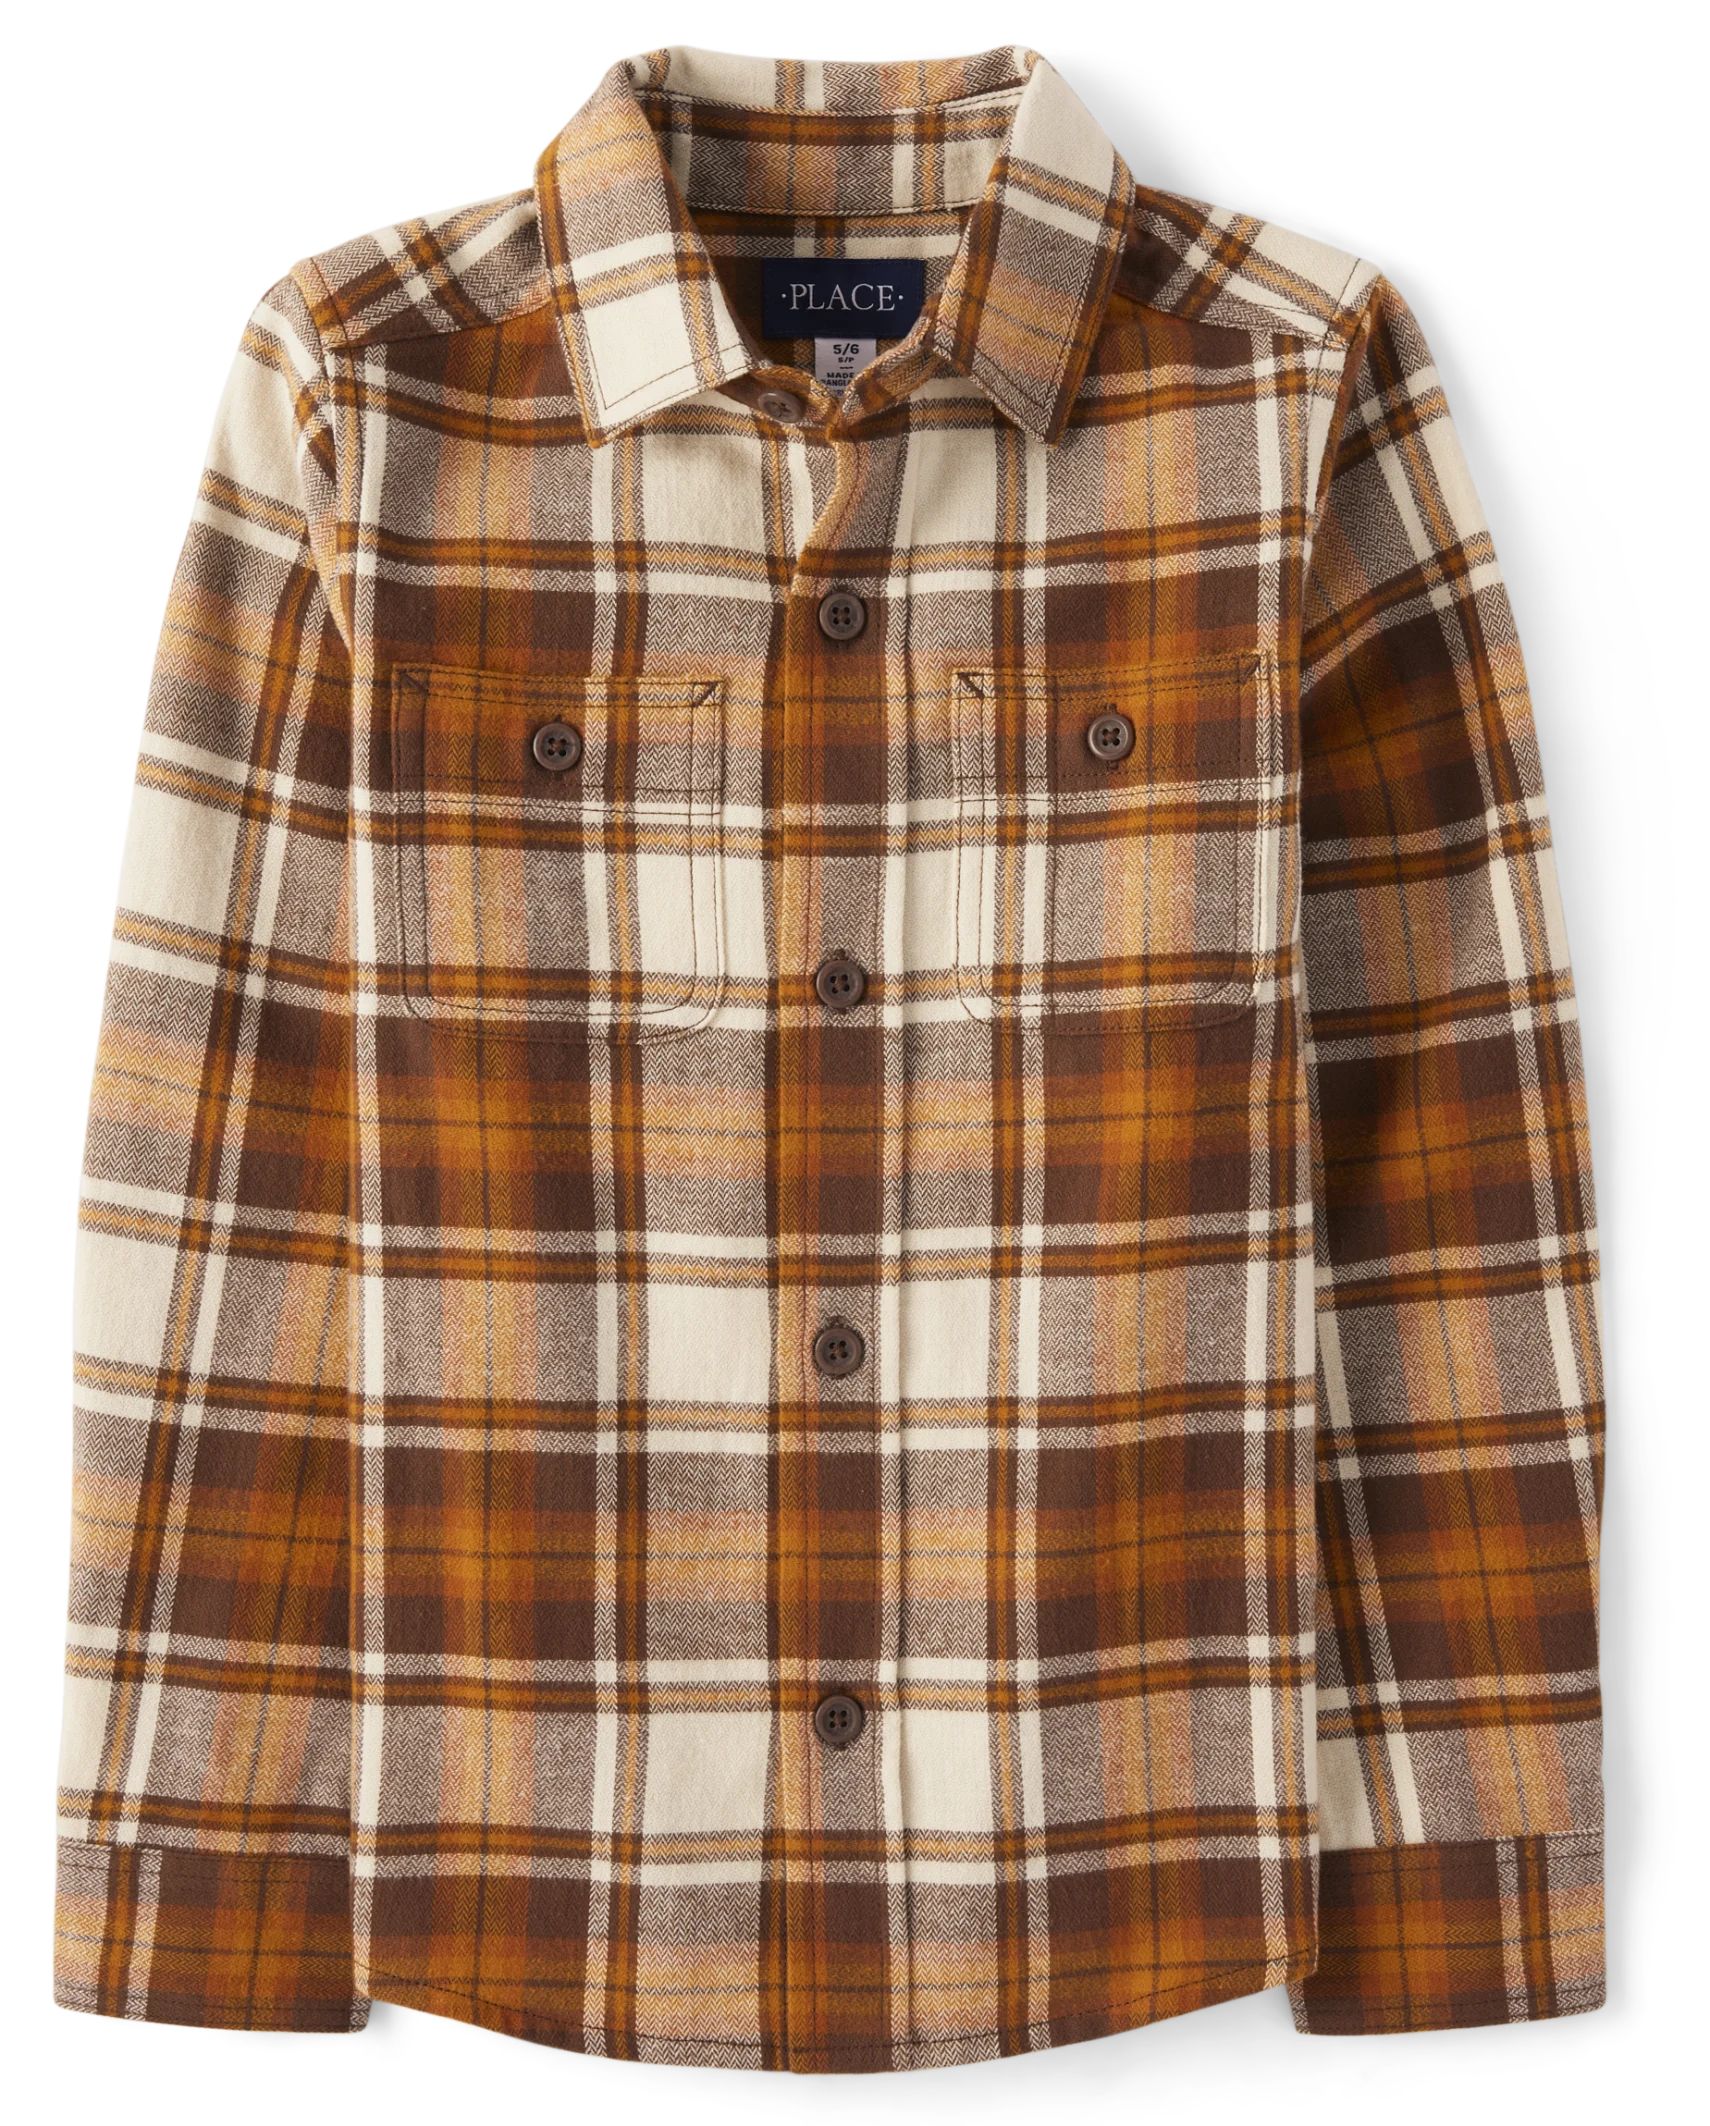 Boys Matching Family Plaid Flannel Button Up Shirt - hay stack | The Children's Place